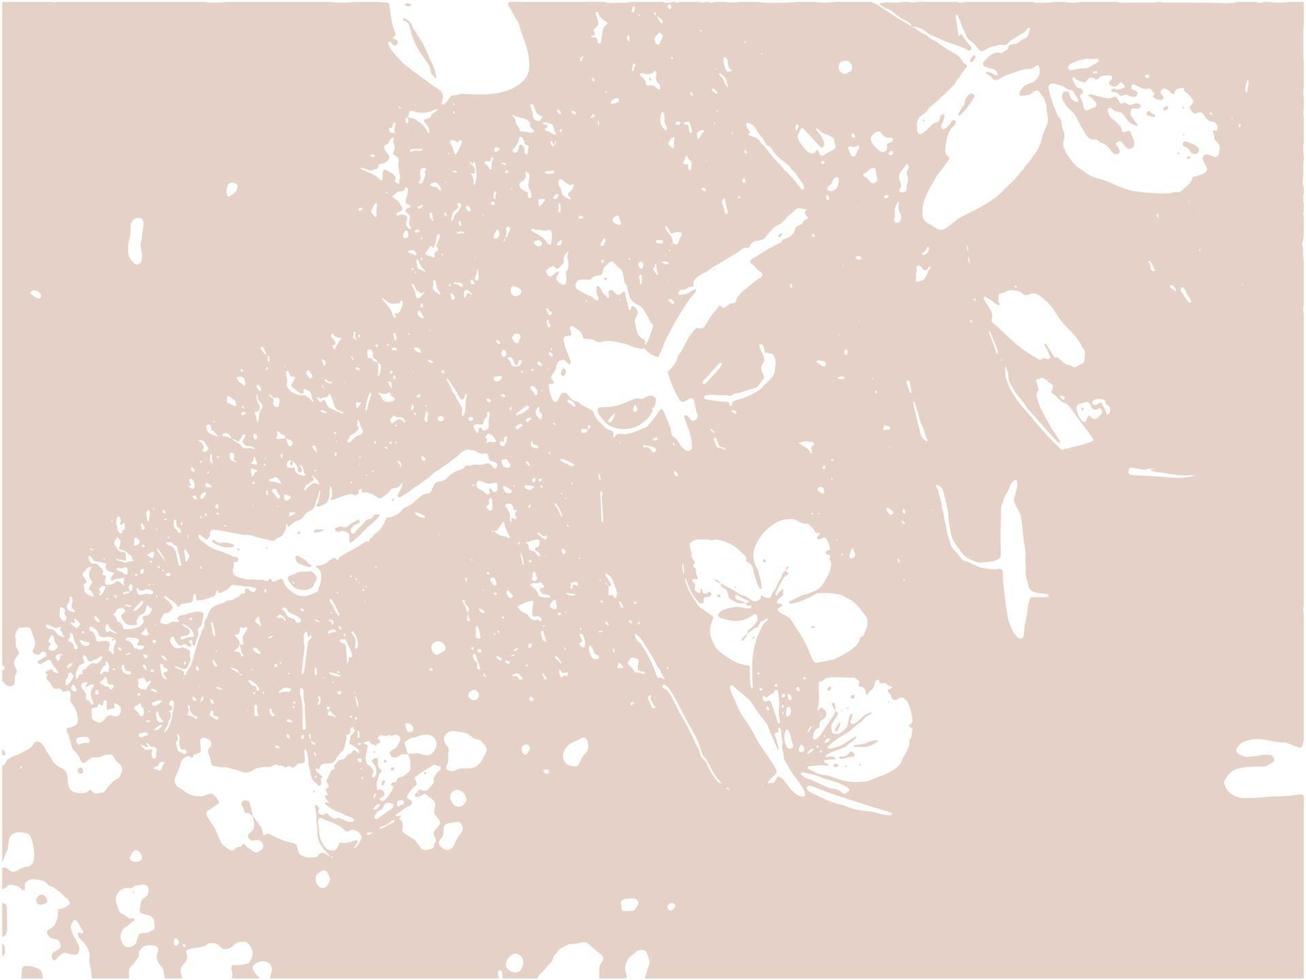 Floral rustic background with hand drawn doodle flowers vector